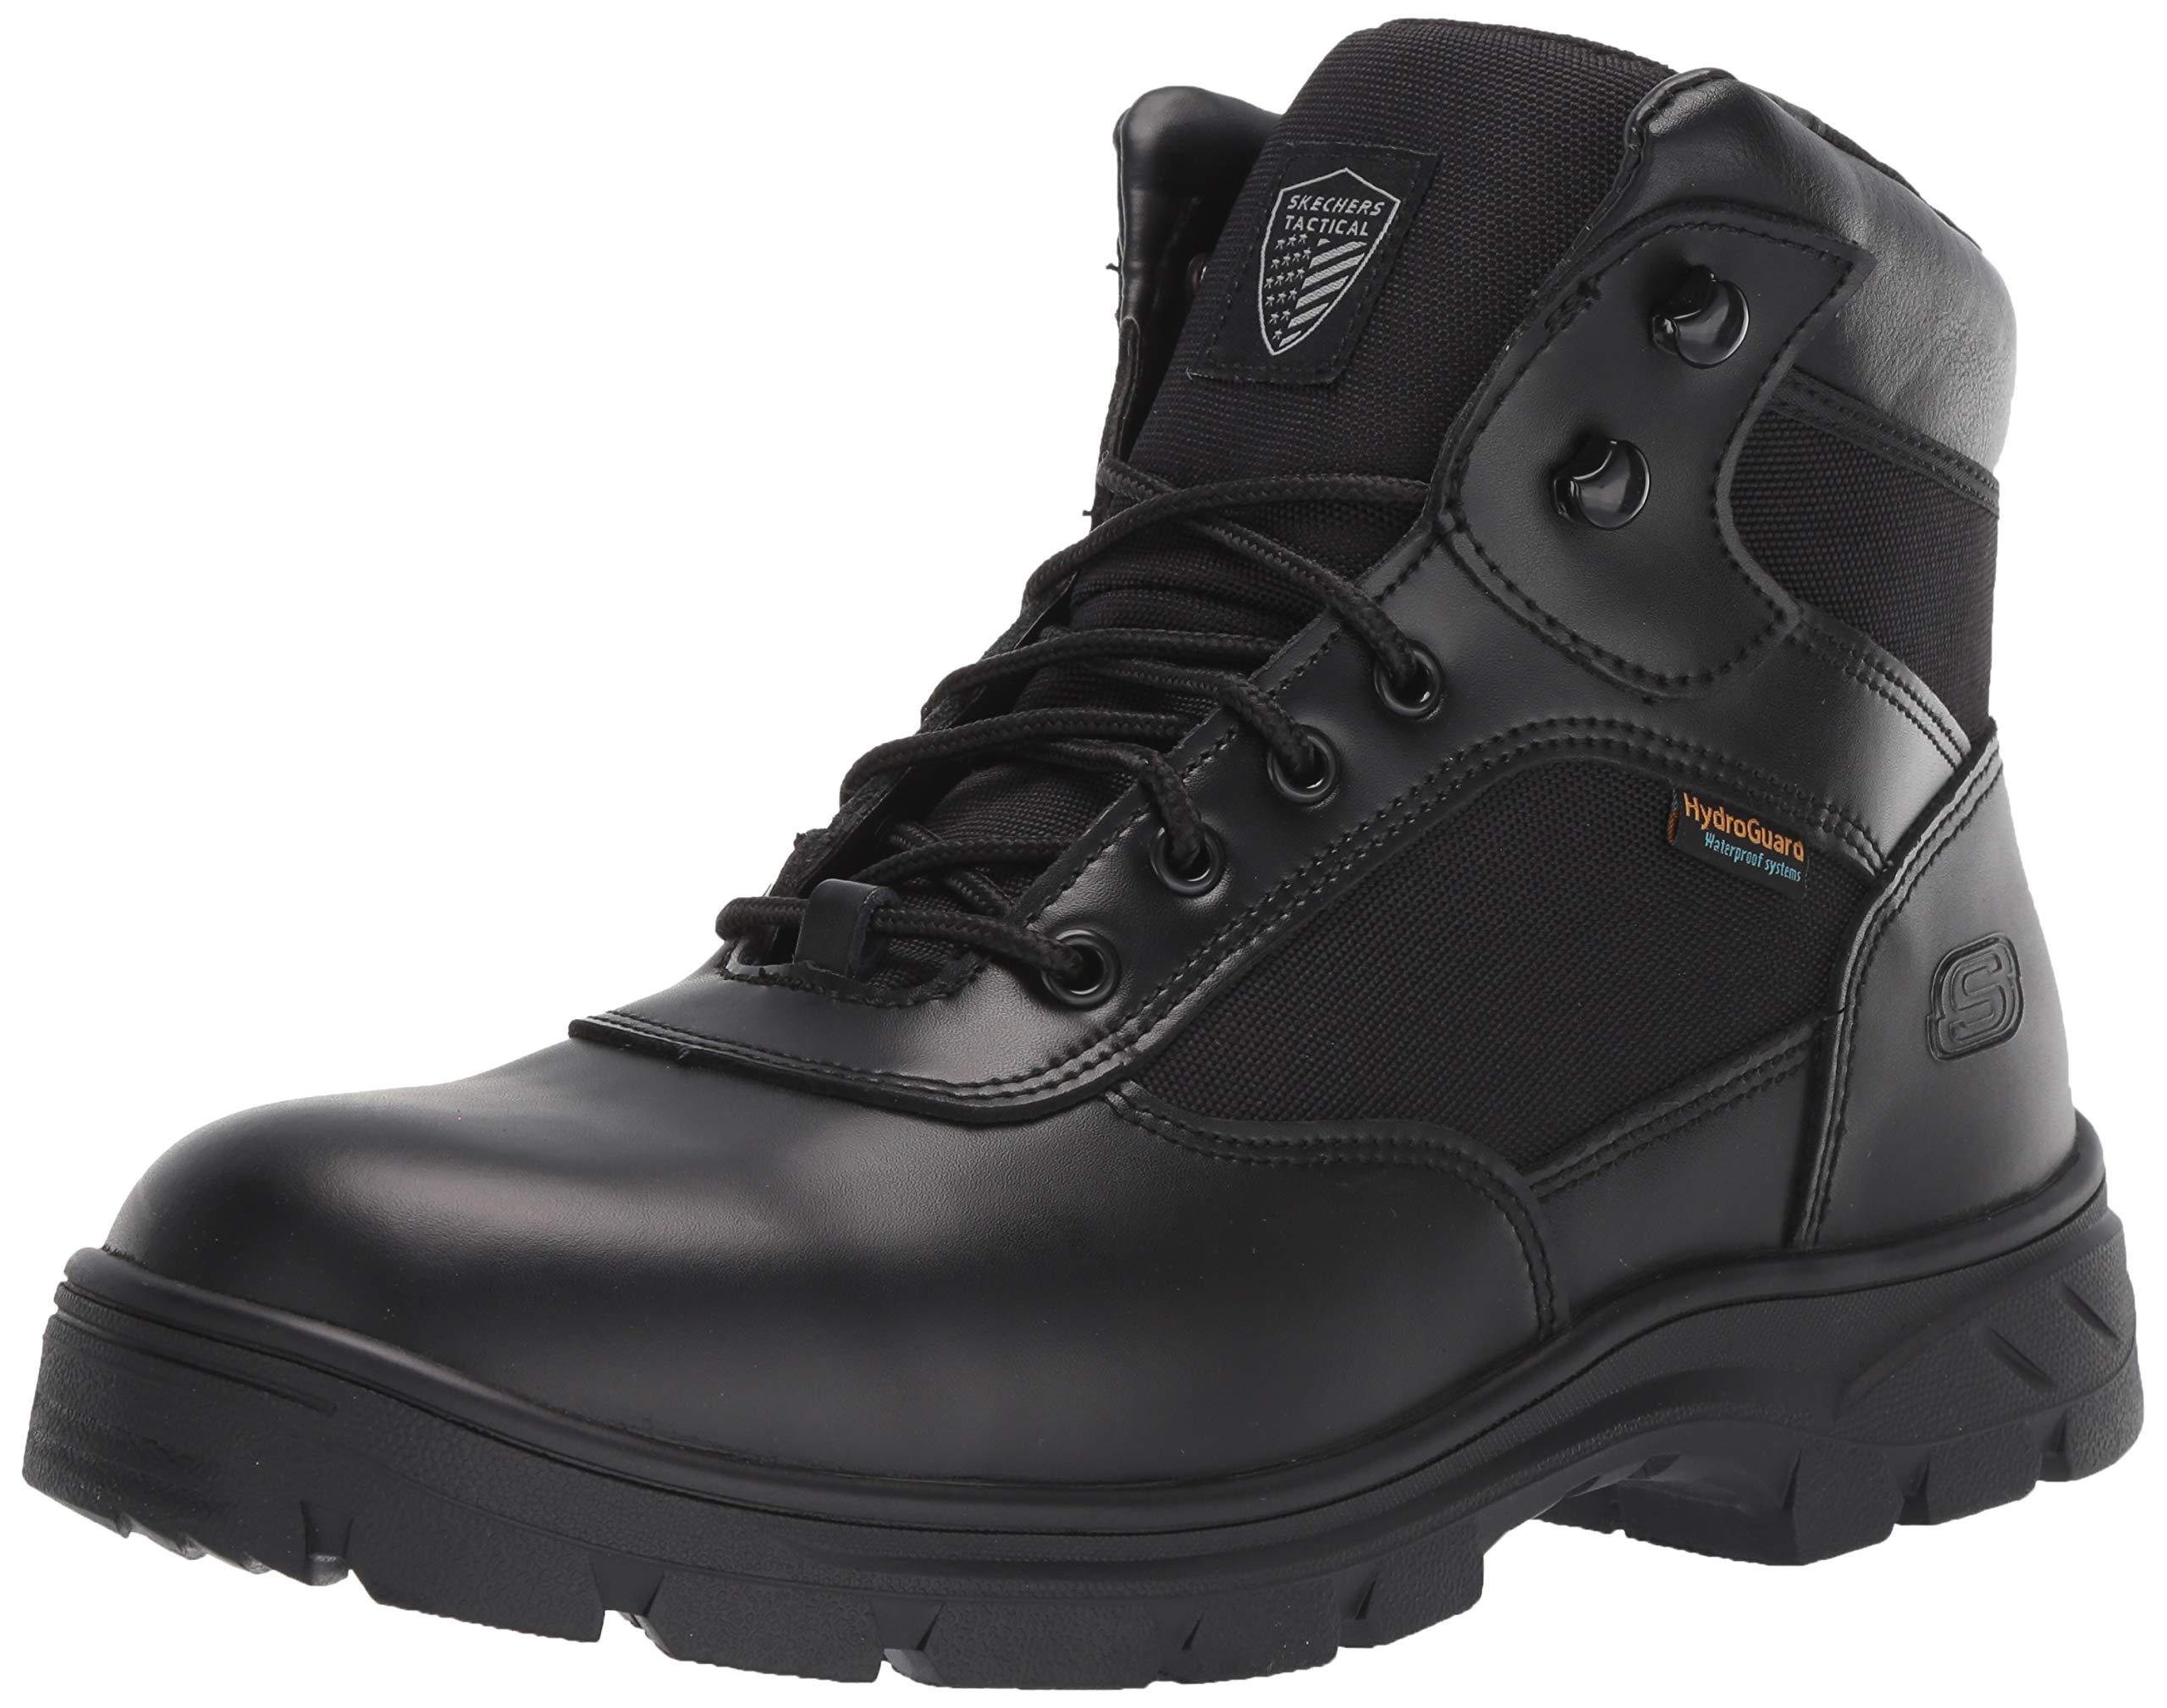 skechers military boots